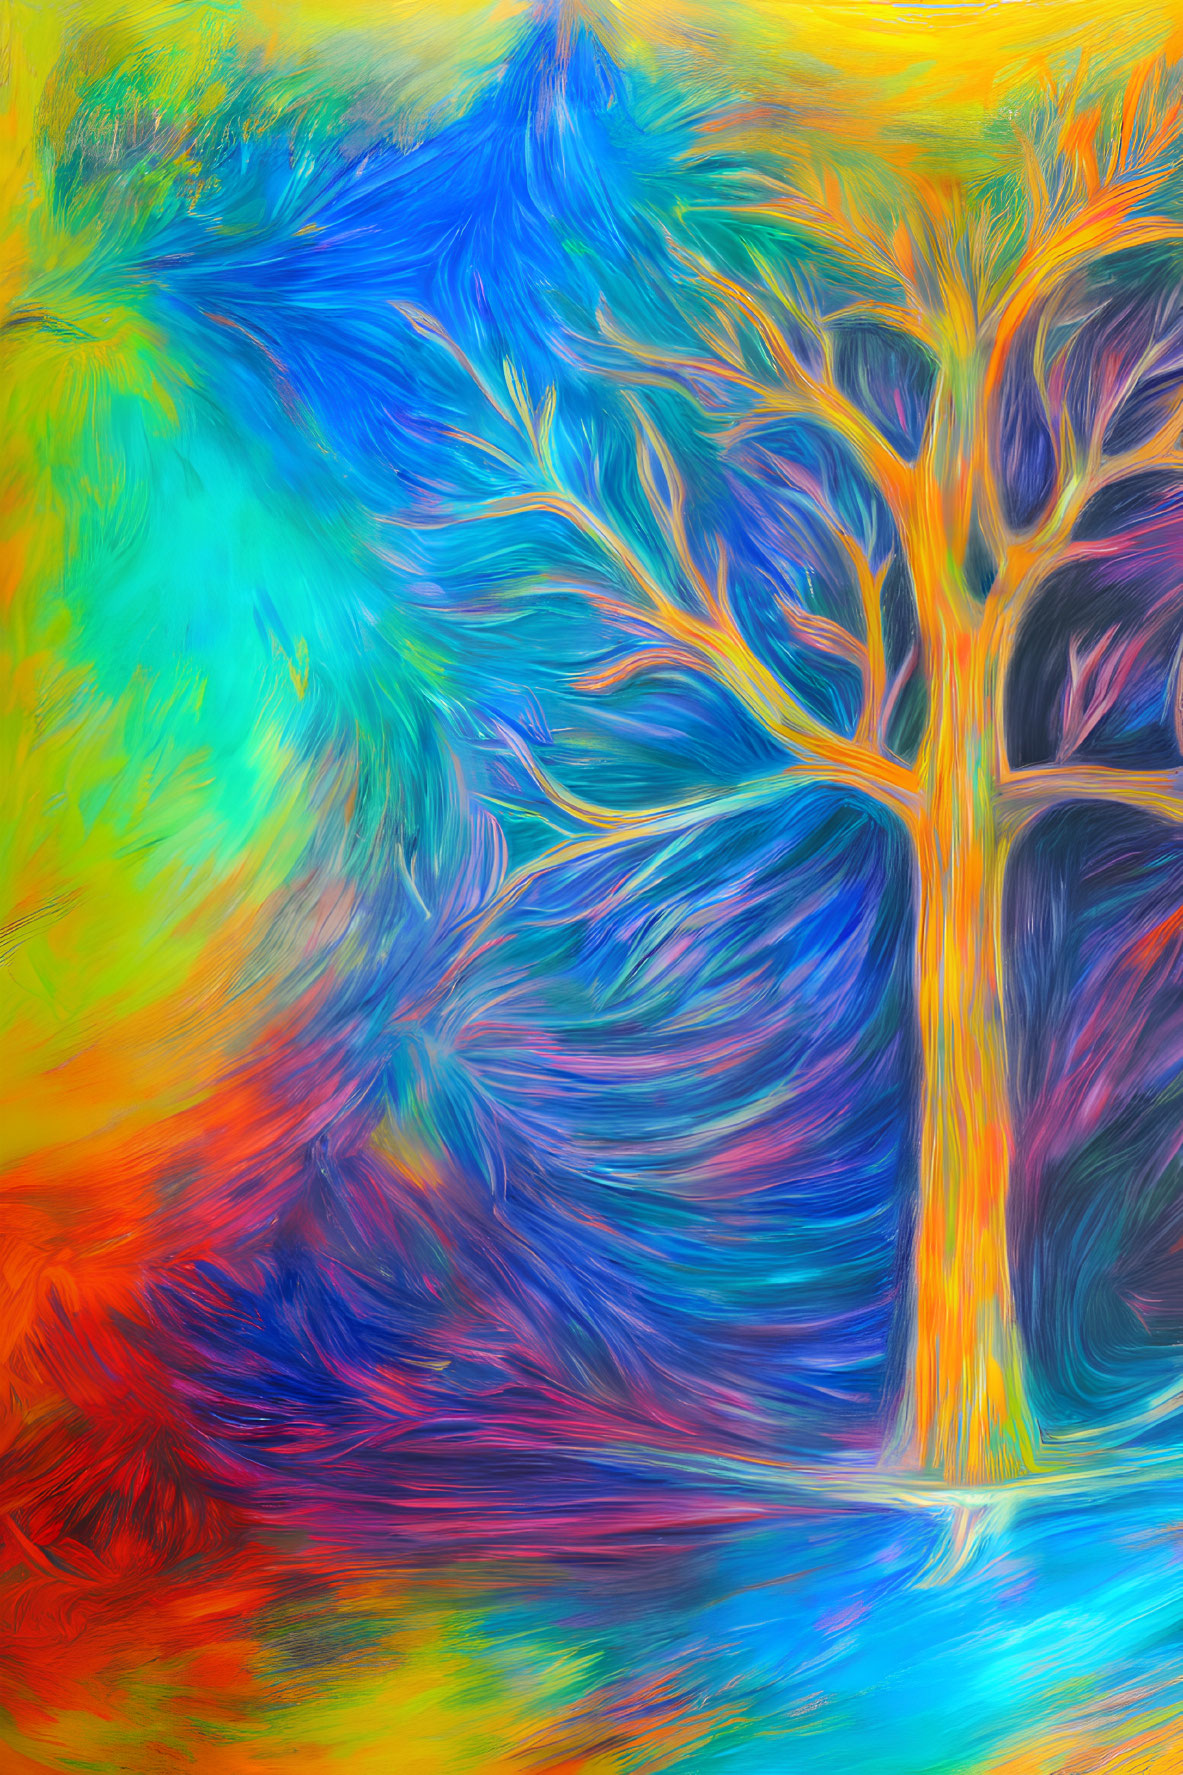 Colorful abstract painting: Swirling tree in vibrant spectrum.